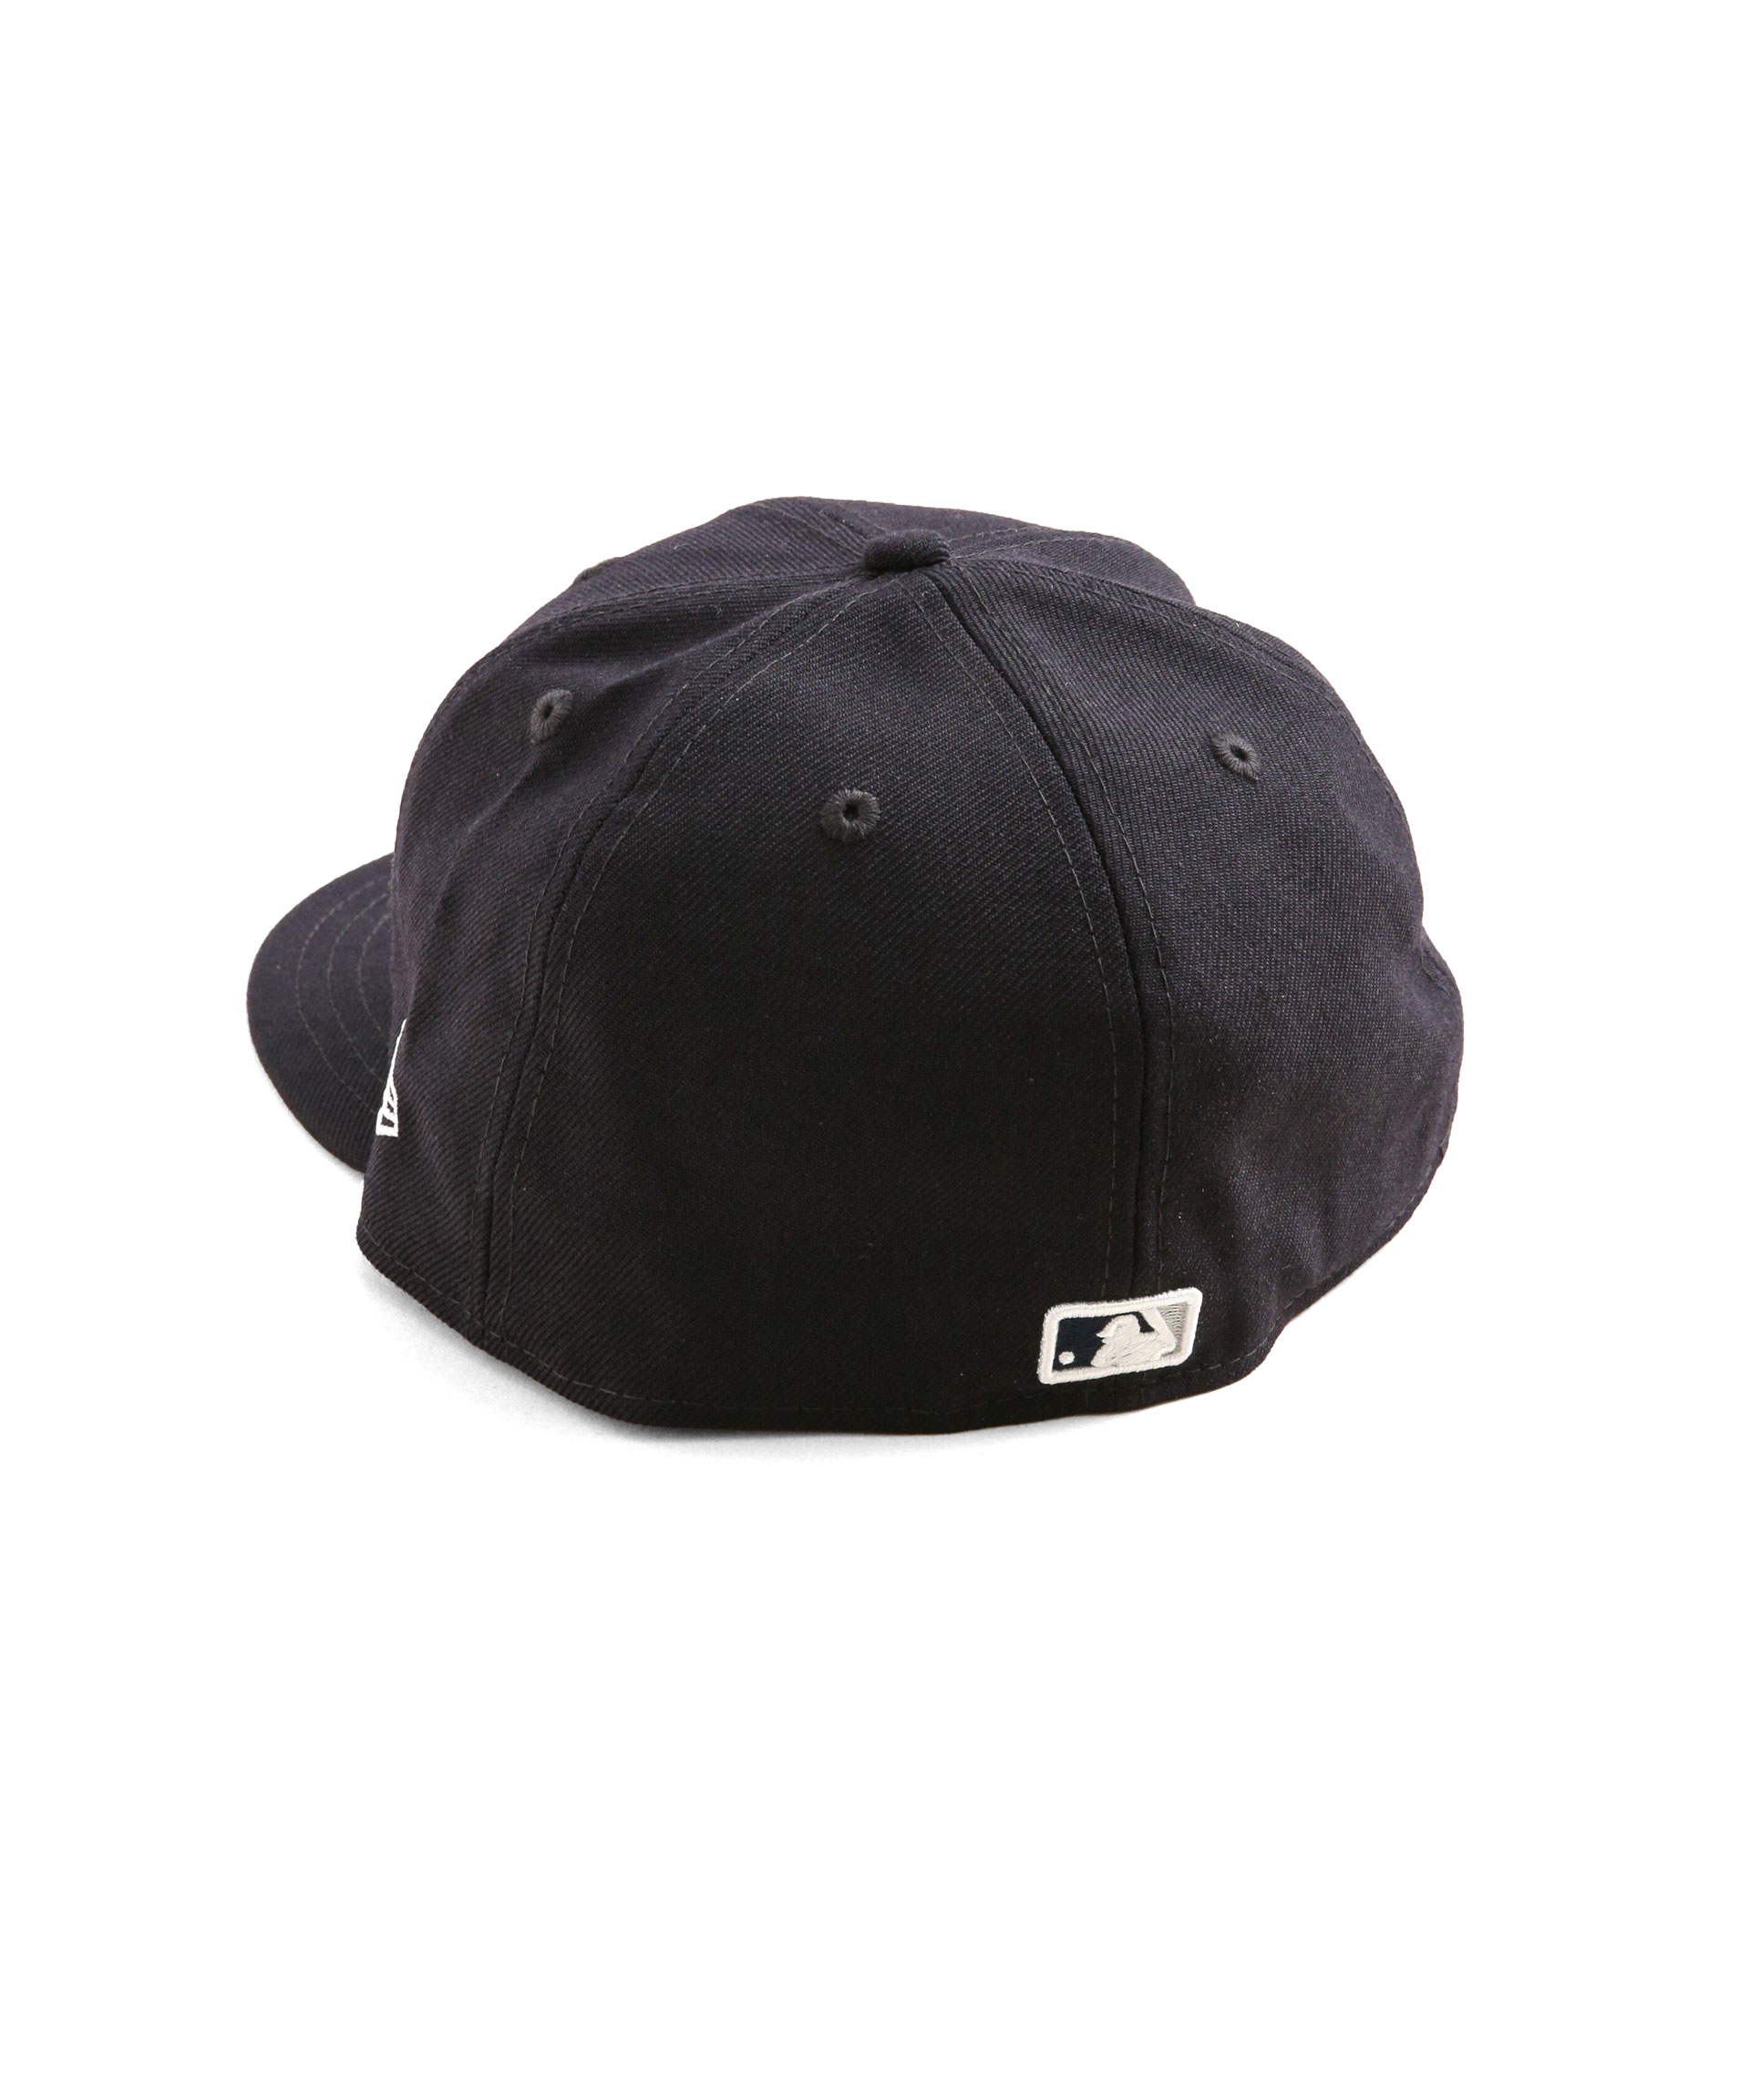 59FIFTY(R) / ニューヨーク・ヤンキース その他画像3